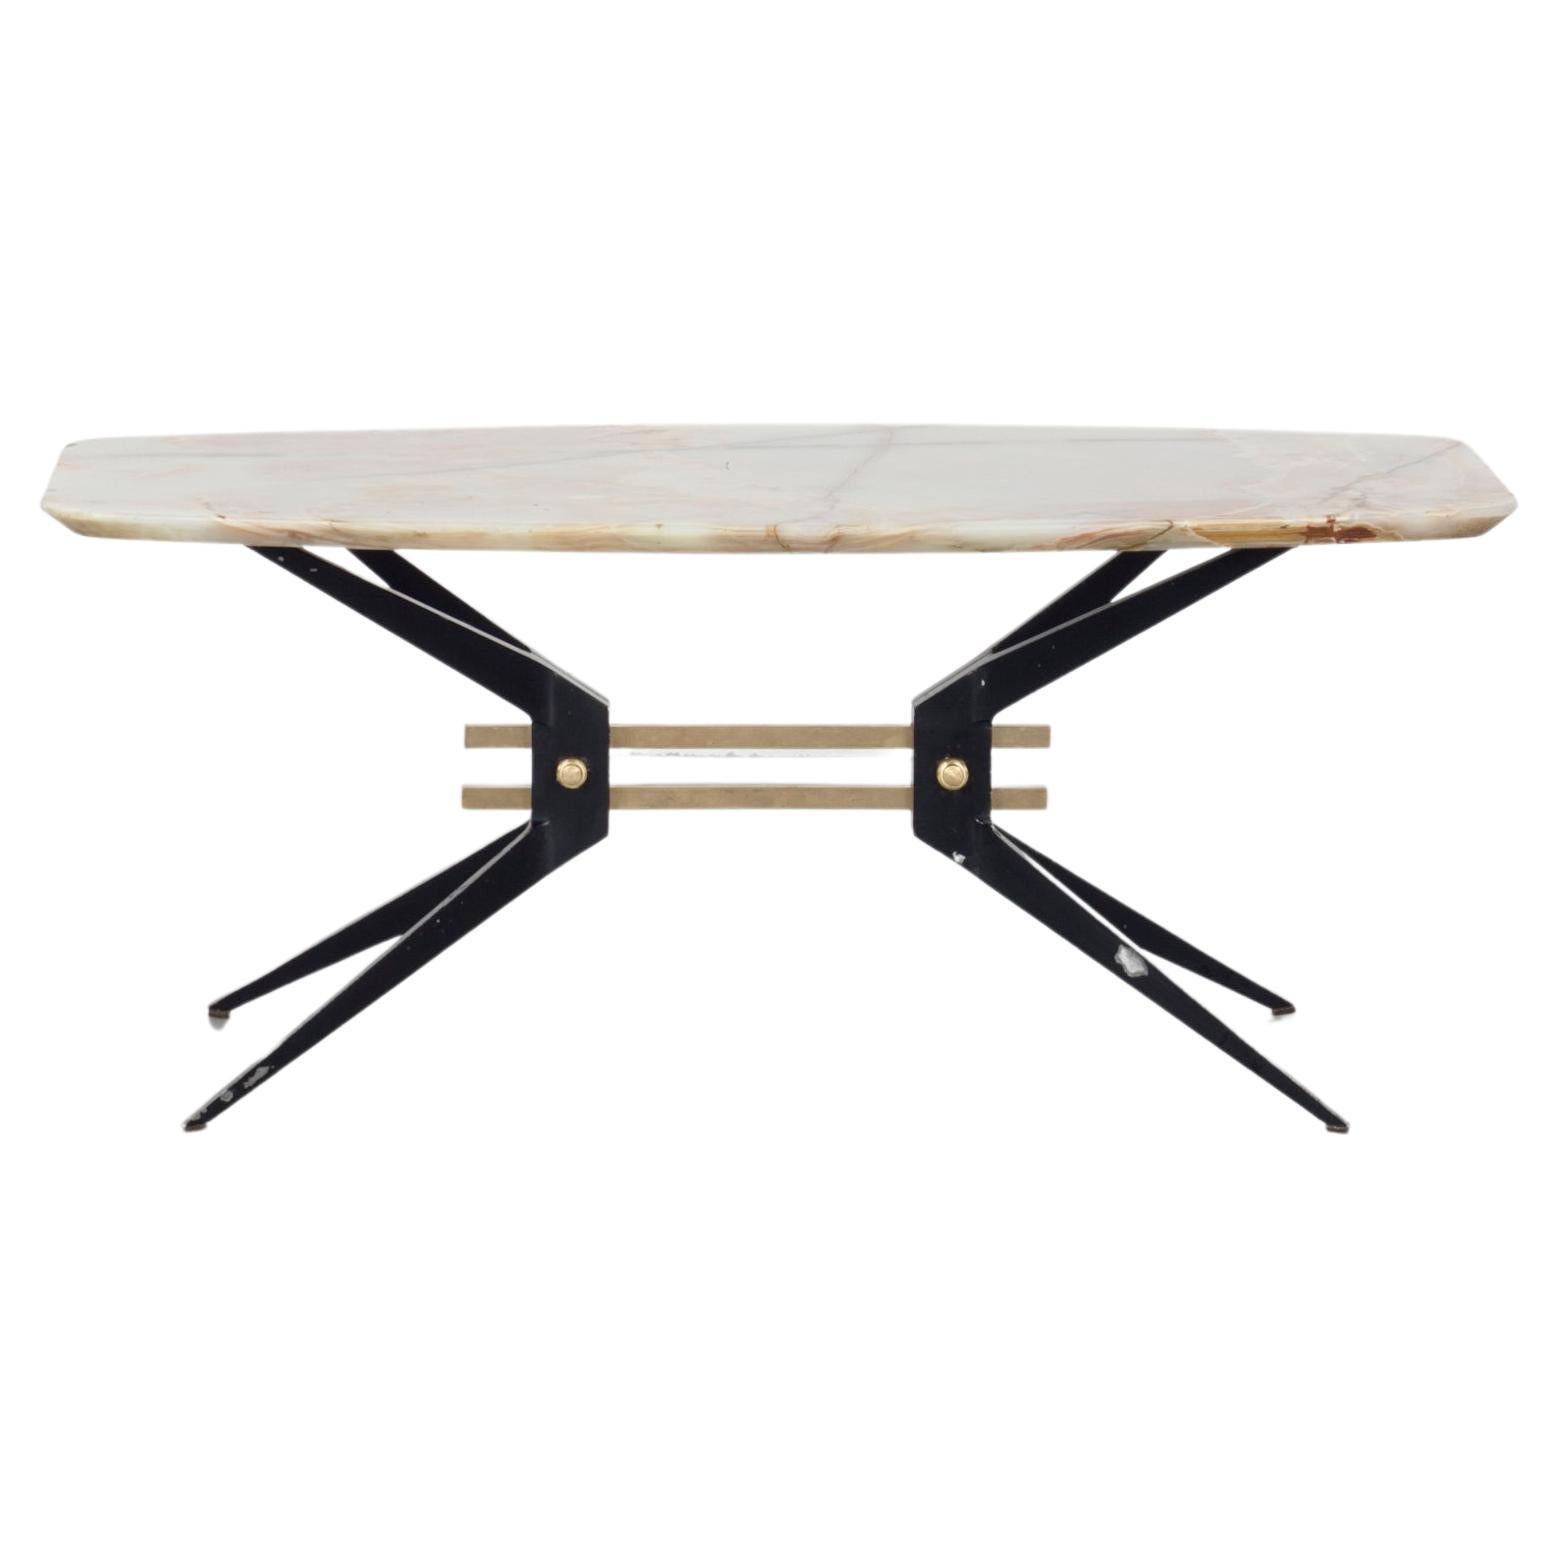 Italian Midcentury Side Table with Onyx Top, 1960 For Sale